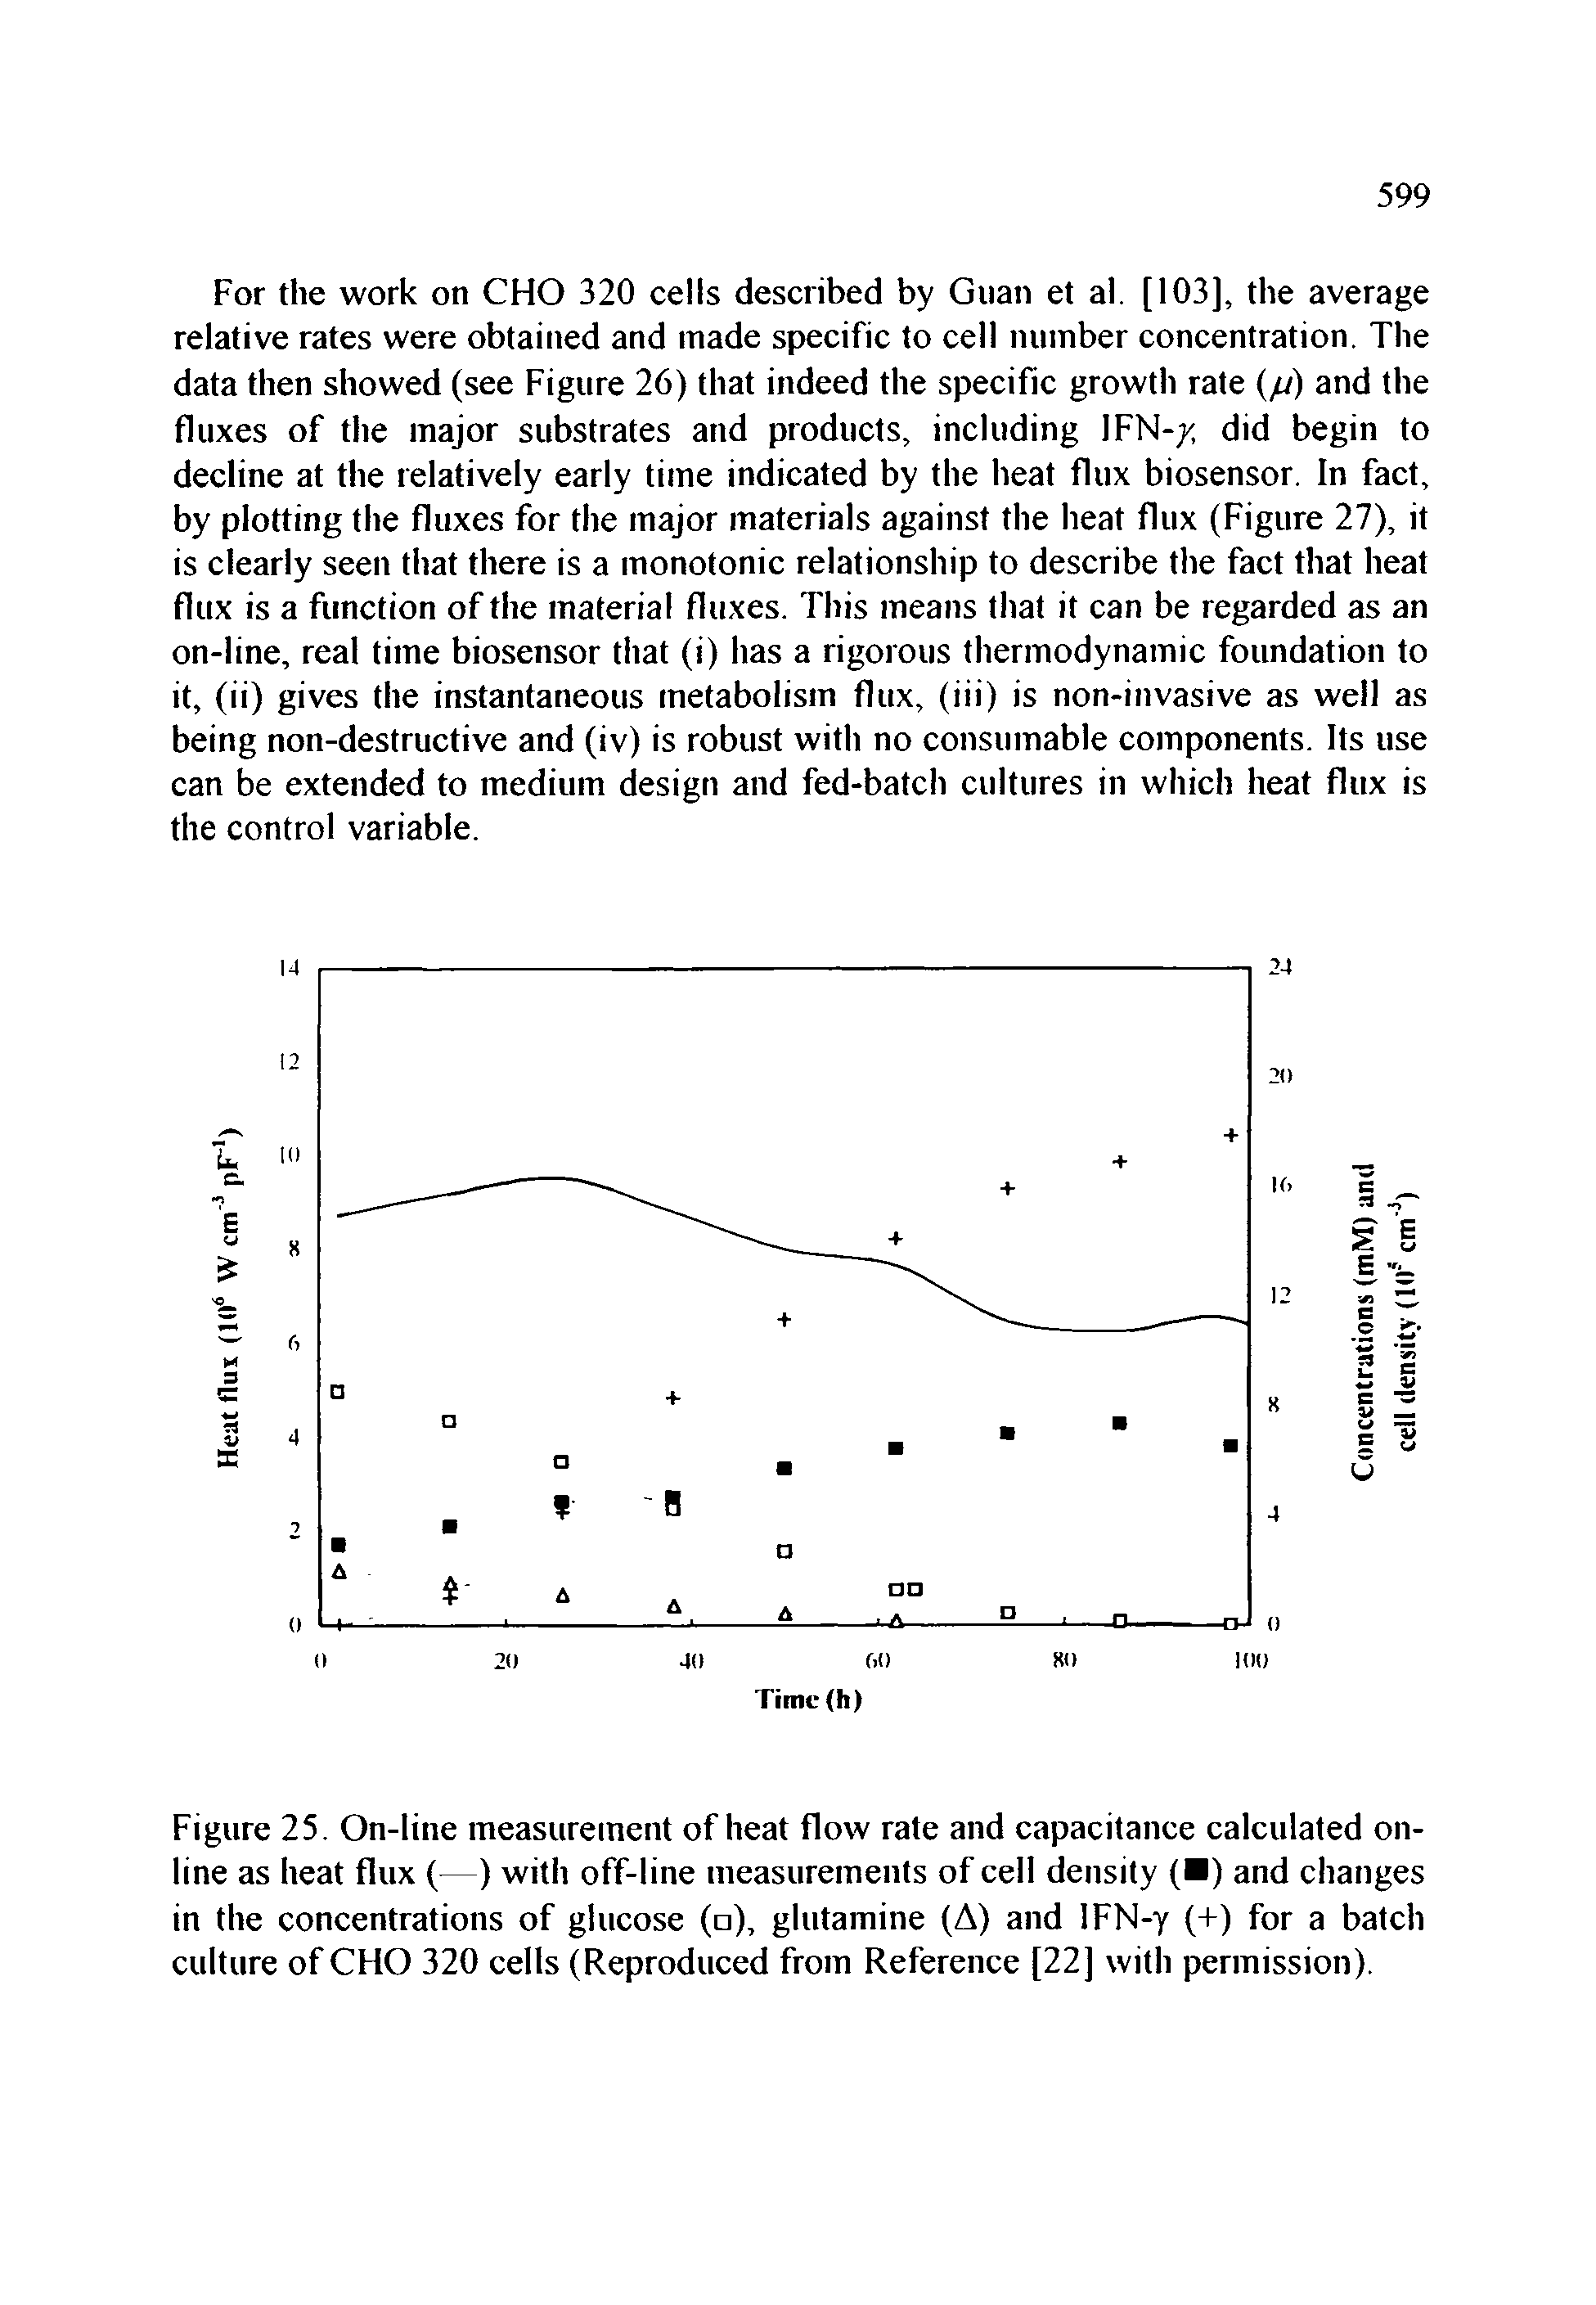 Figure 25. On-line measurement of heat flow rate and capacitance calculated online as heat flux (—) with off-line measurements of cell density ( ) and changes in the concentrations of glucose ( ), glutamine (A) and IFN-y (+) for a batch culture of CHO 320 cells (Reproduced from Reference [22] with permission).